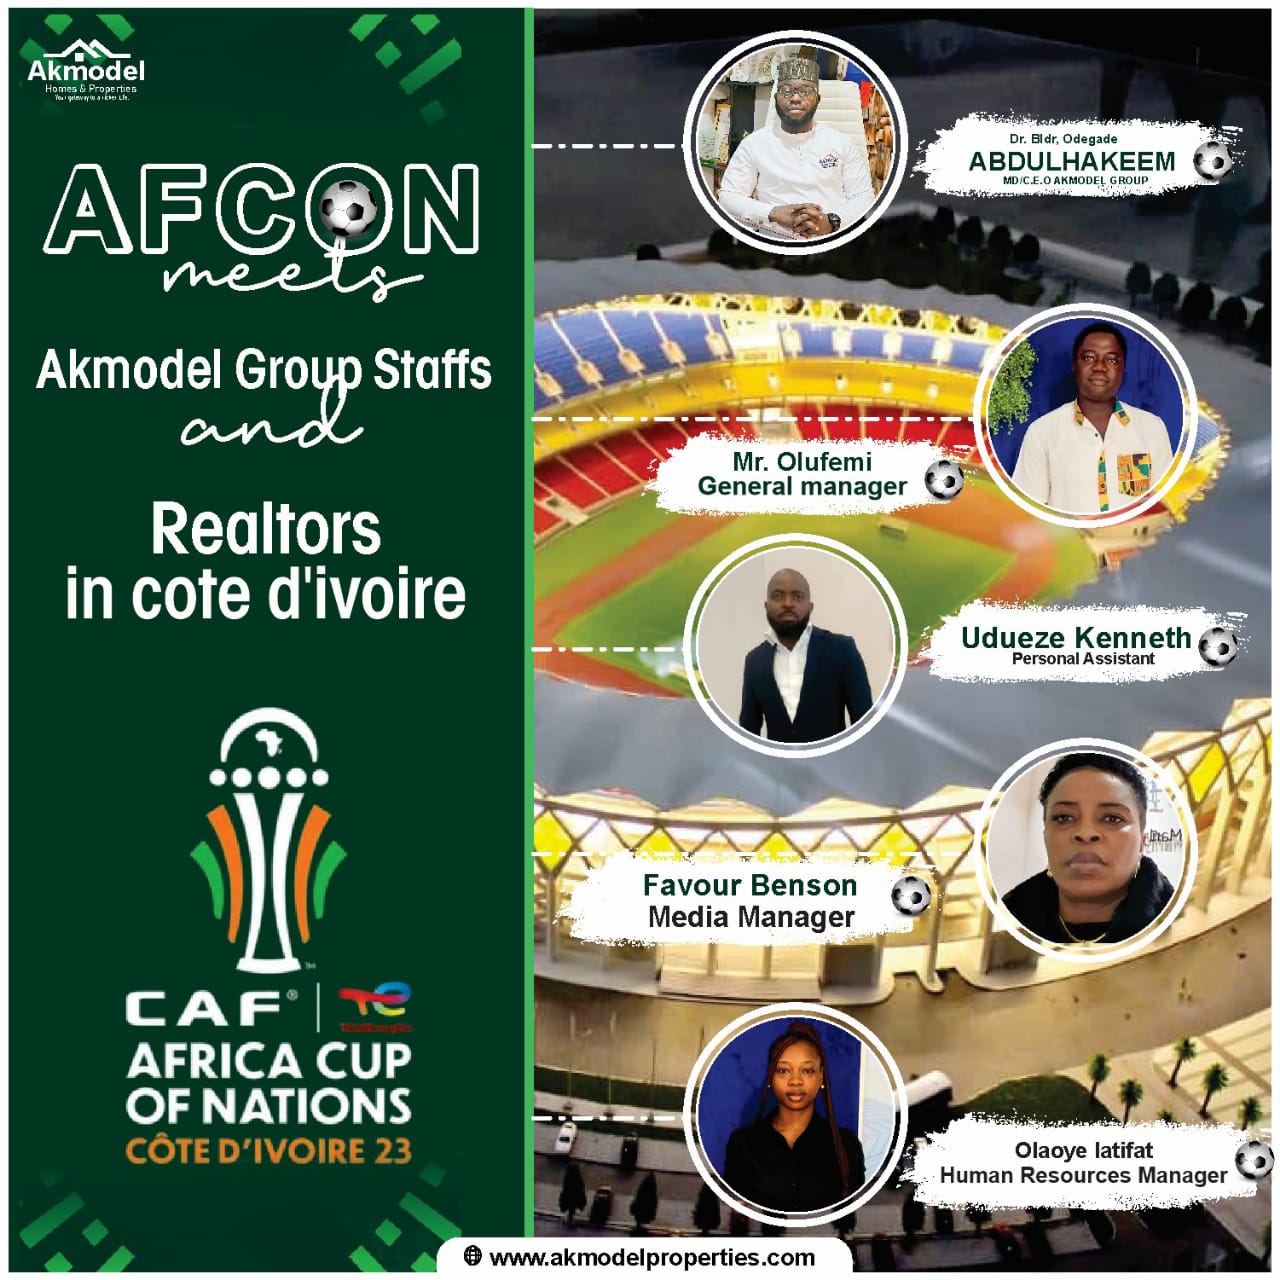 Akmodel Group's Executive Manager and Realtors are at the Afcon Final.